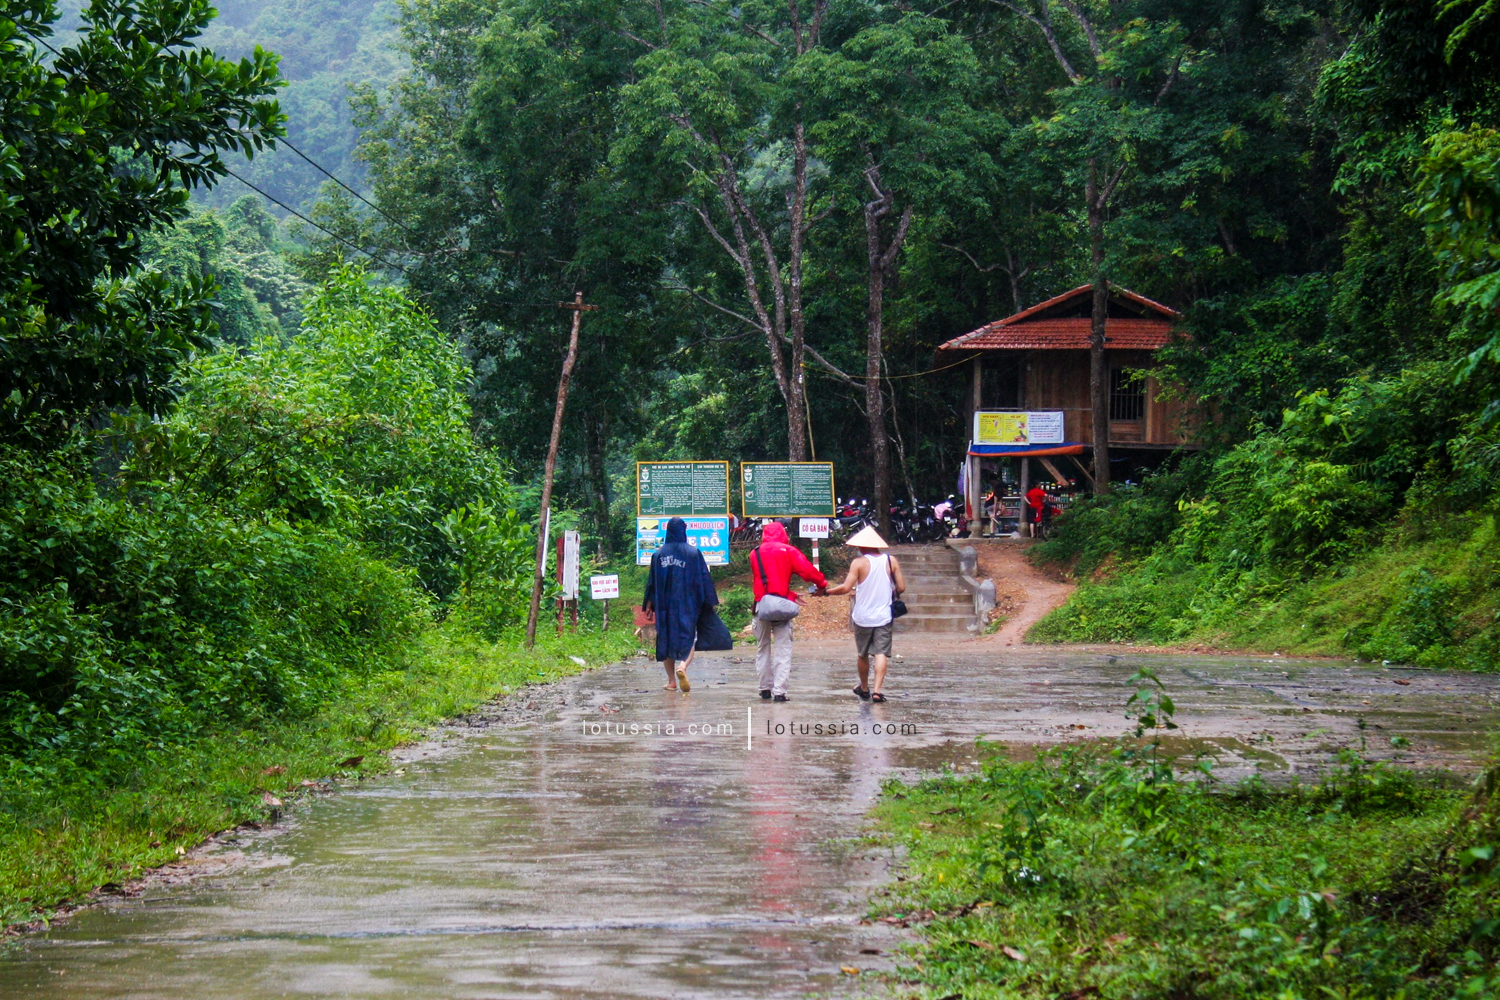 khe ro forest photo gallery bac giang